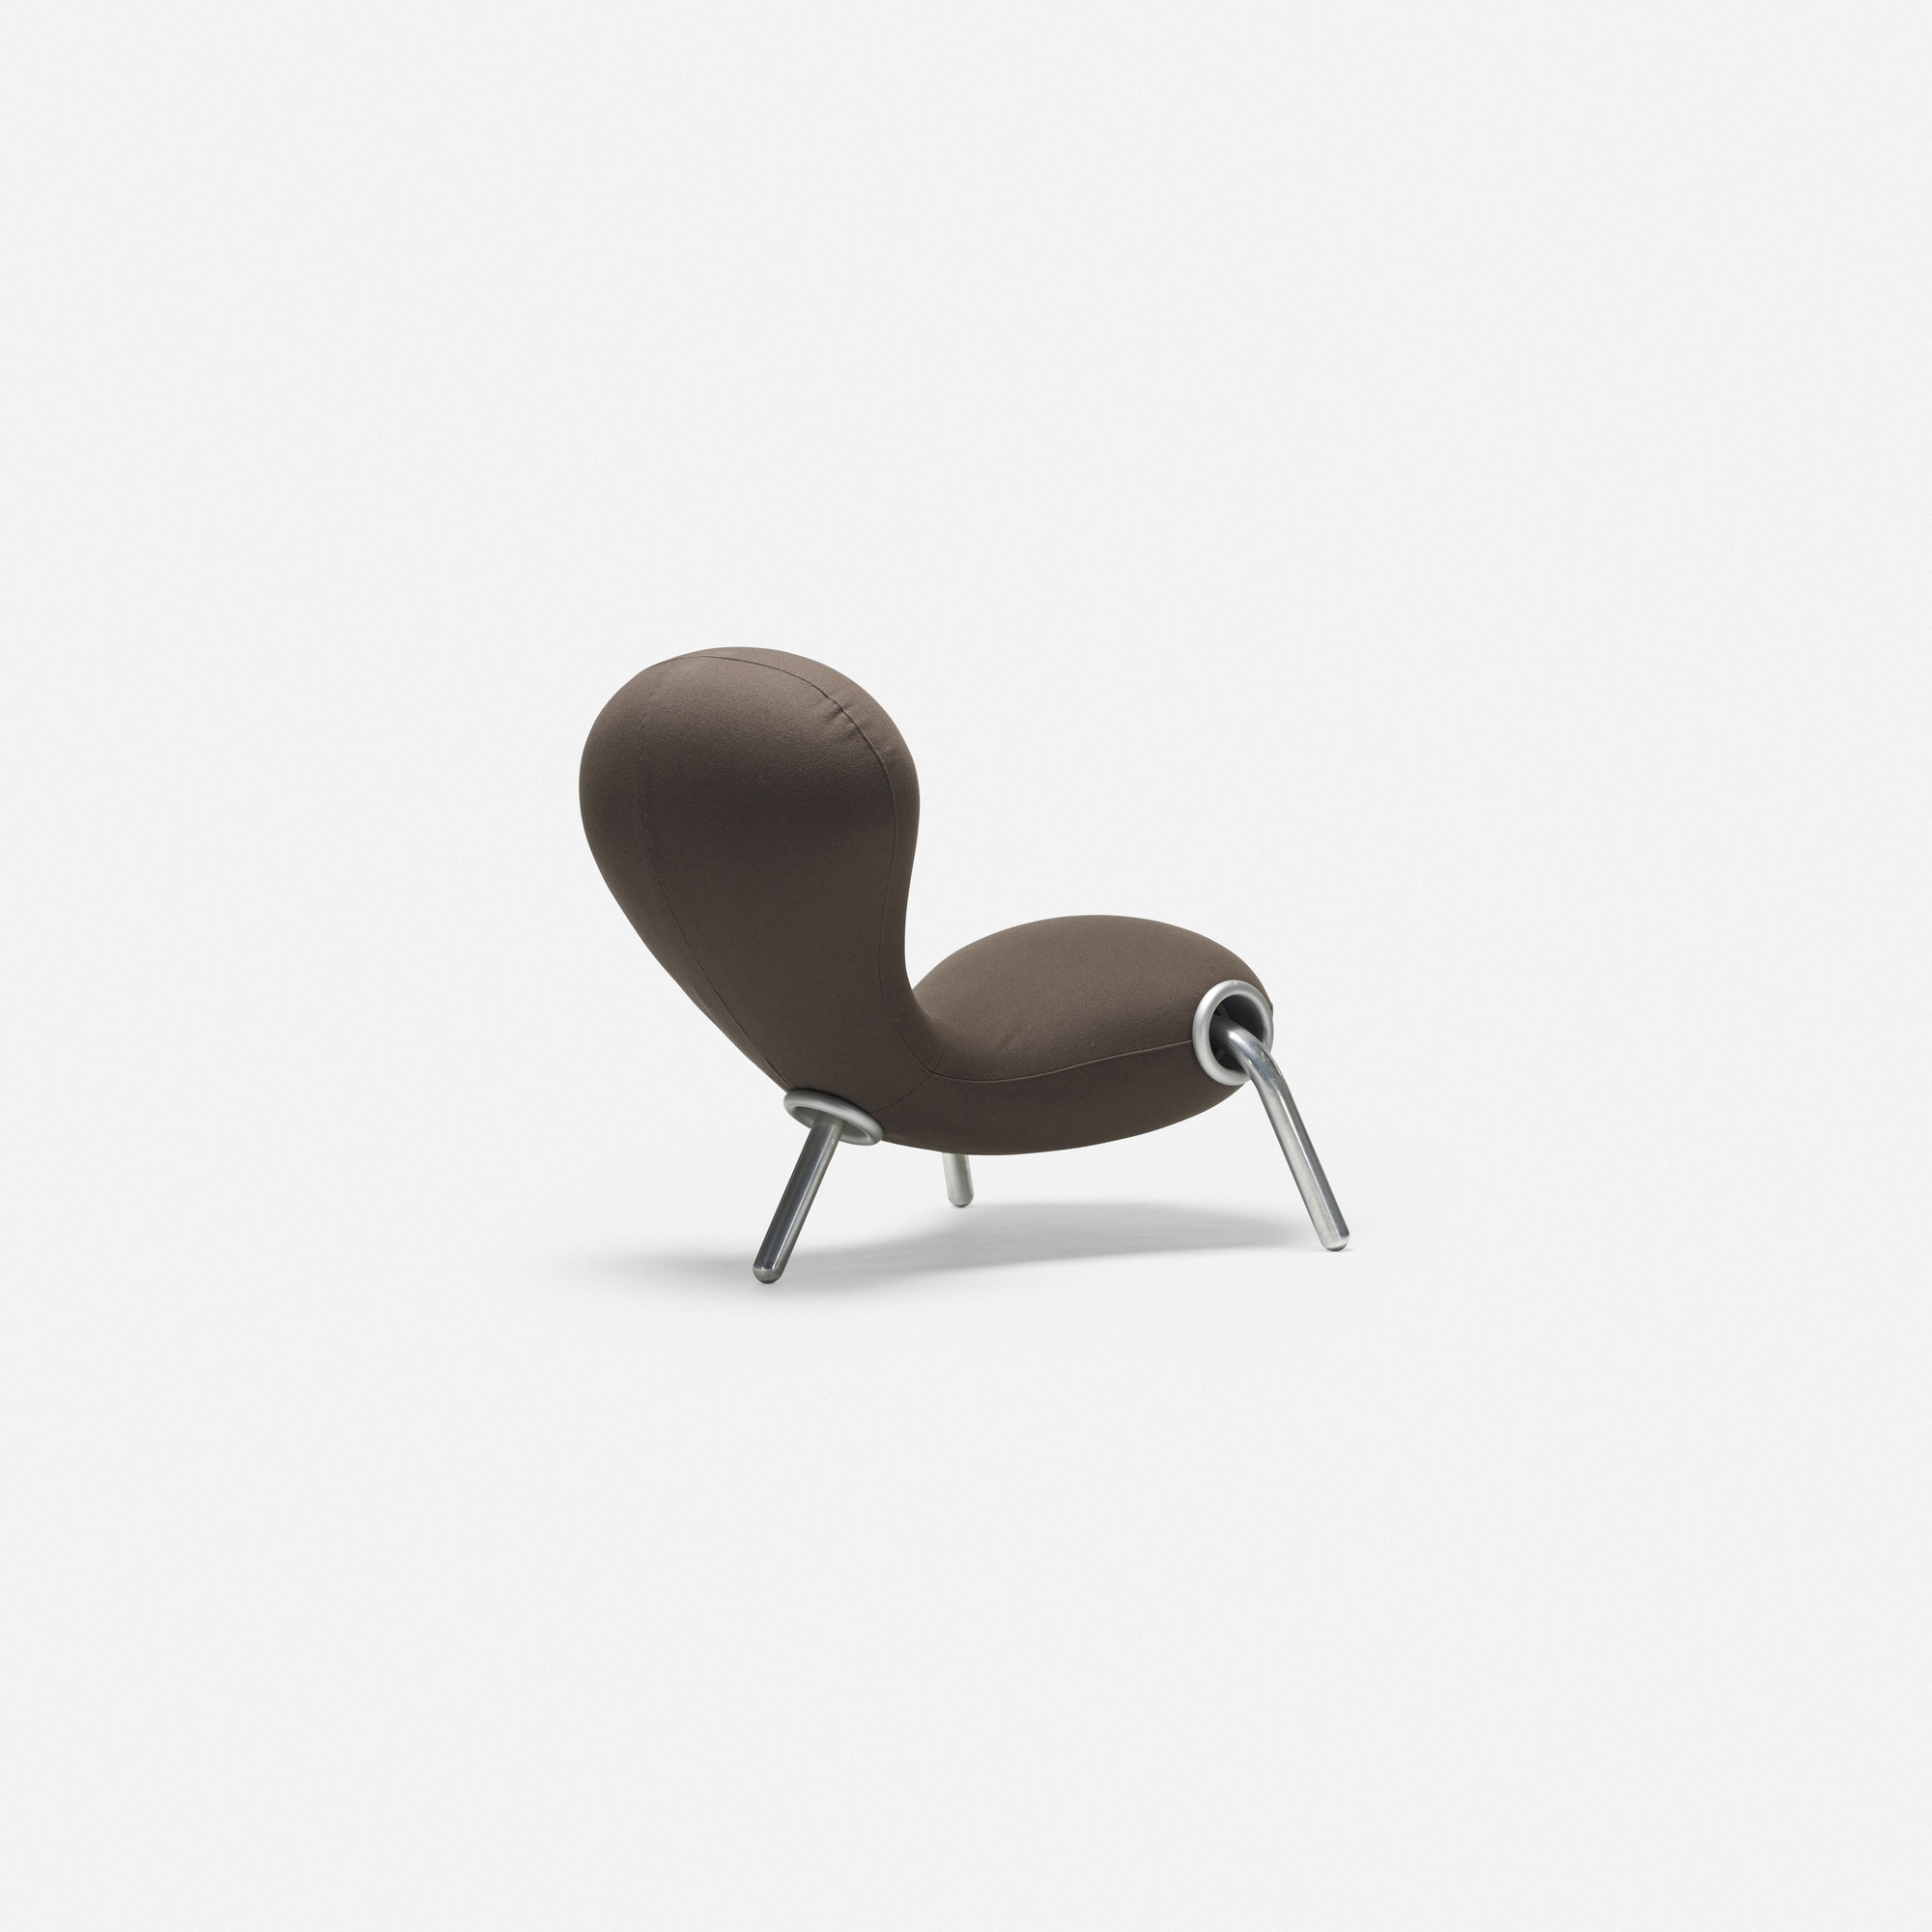 At Home: Marc Newson - Embryo Chair (1988) 